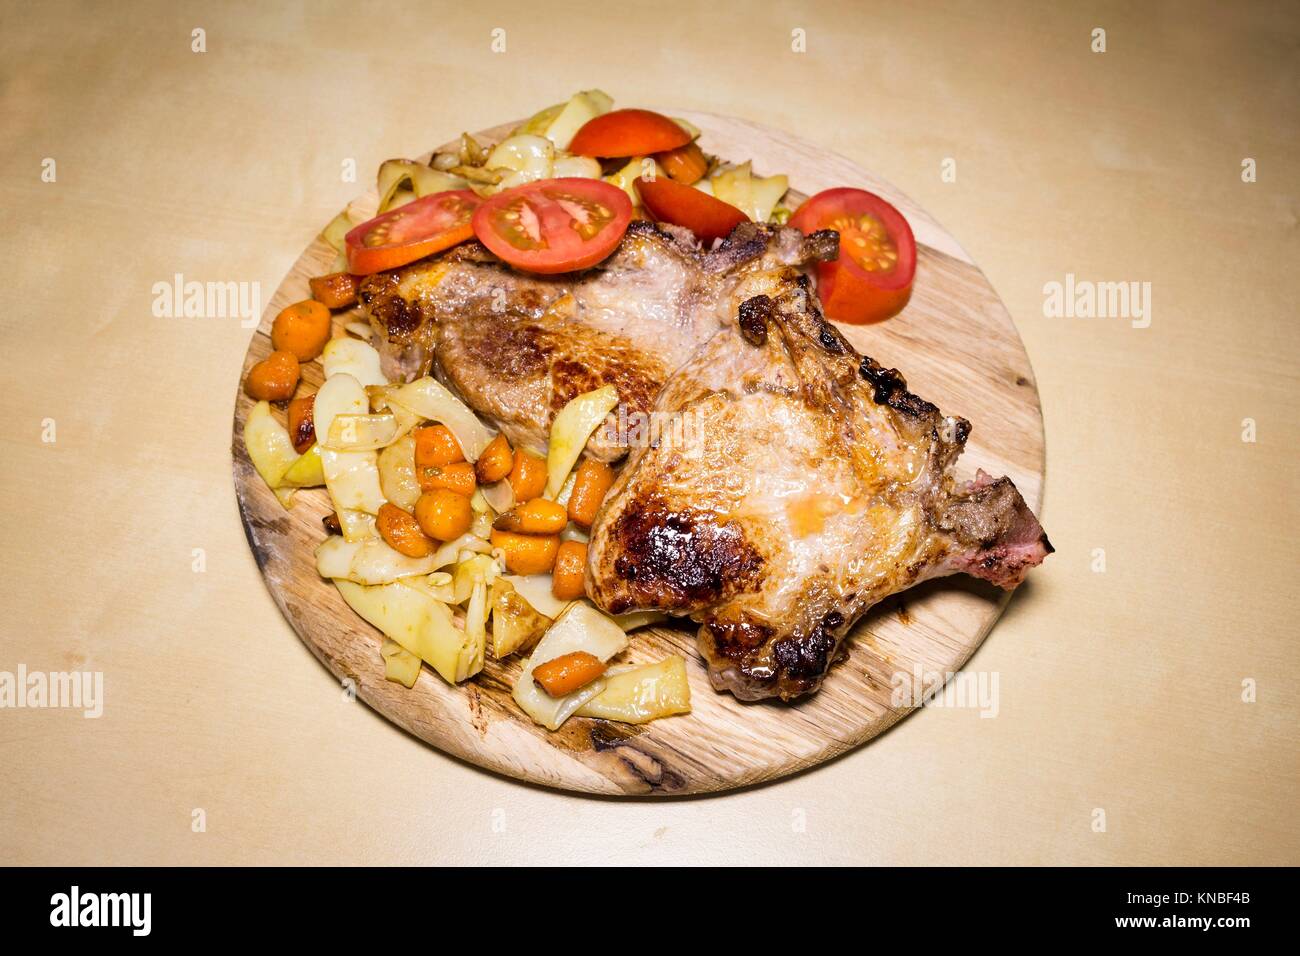 Pork meat with yellow beans ,carrots and tomatoes on a wooden board. Stock Photo